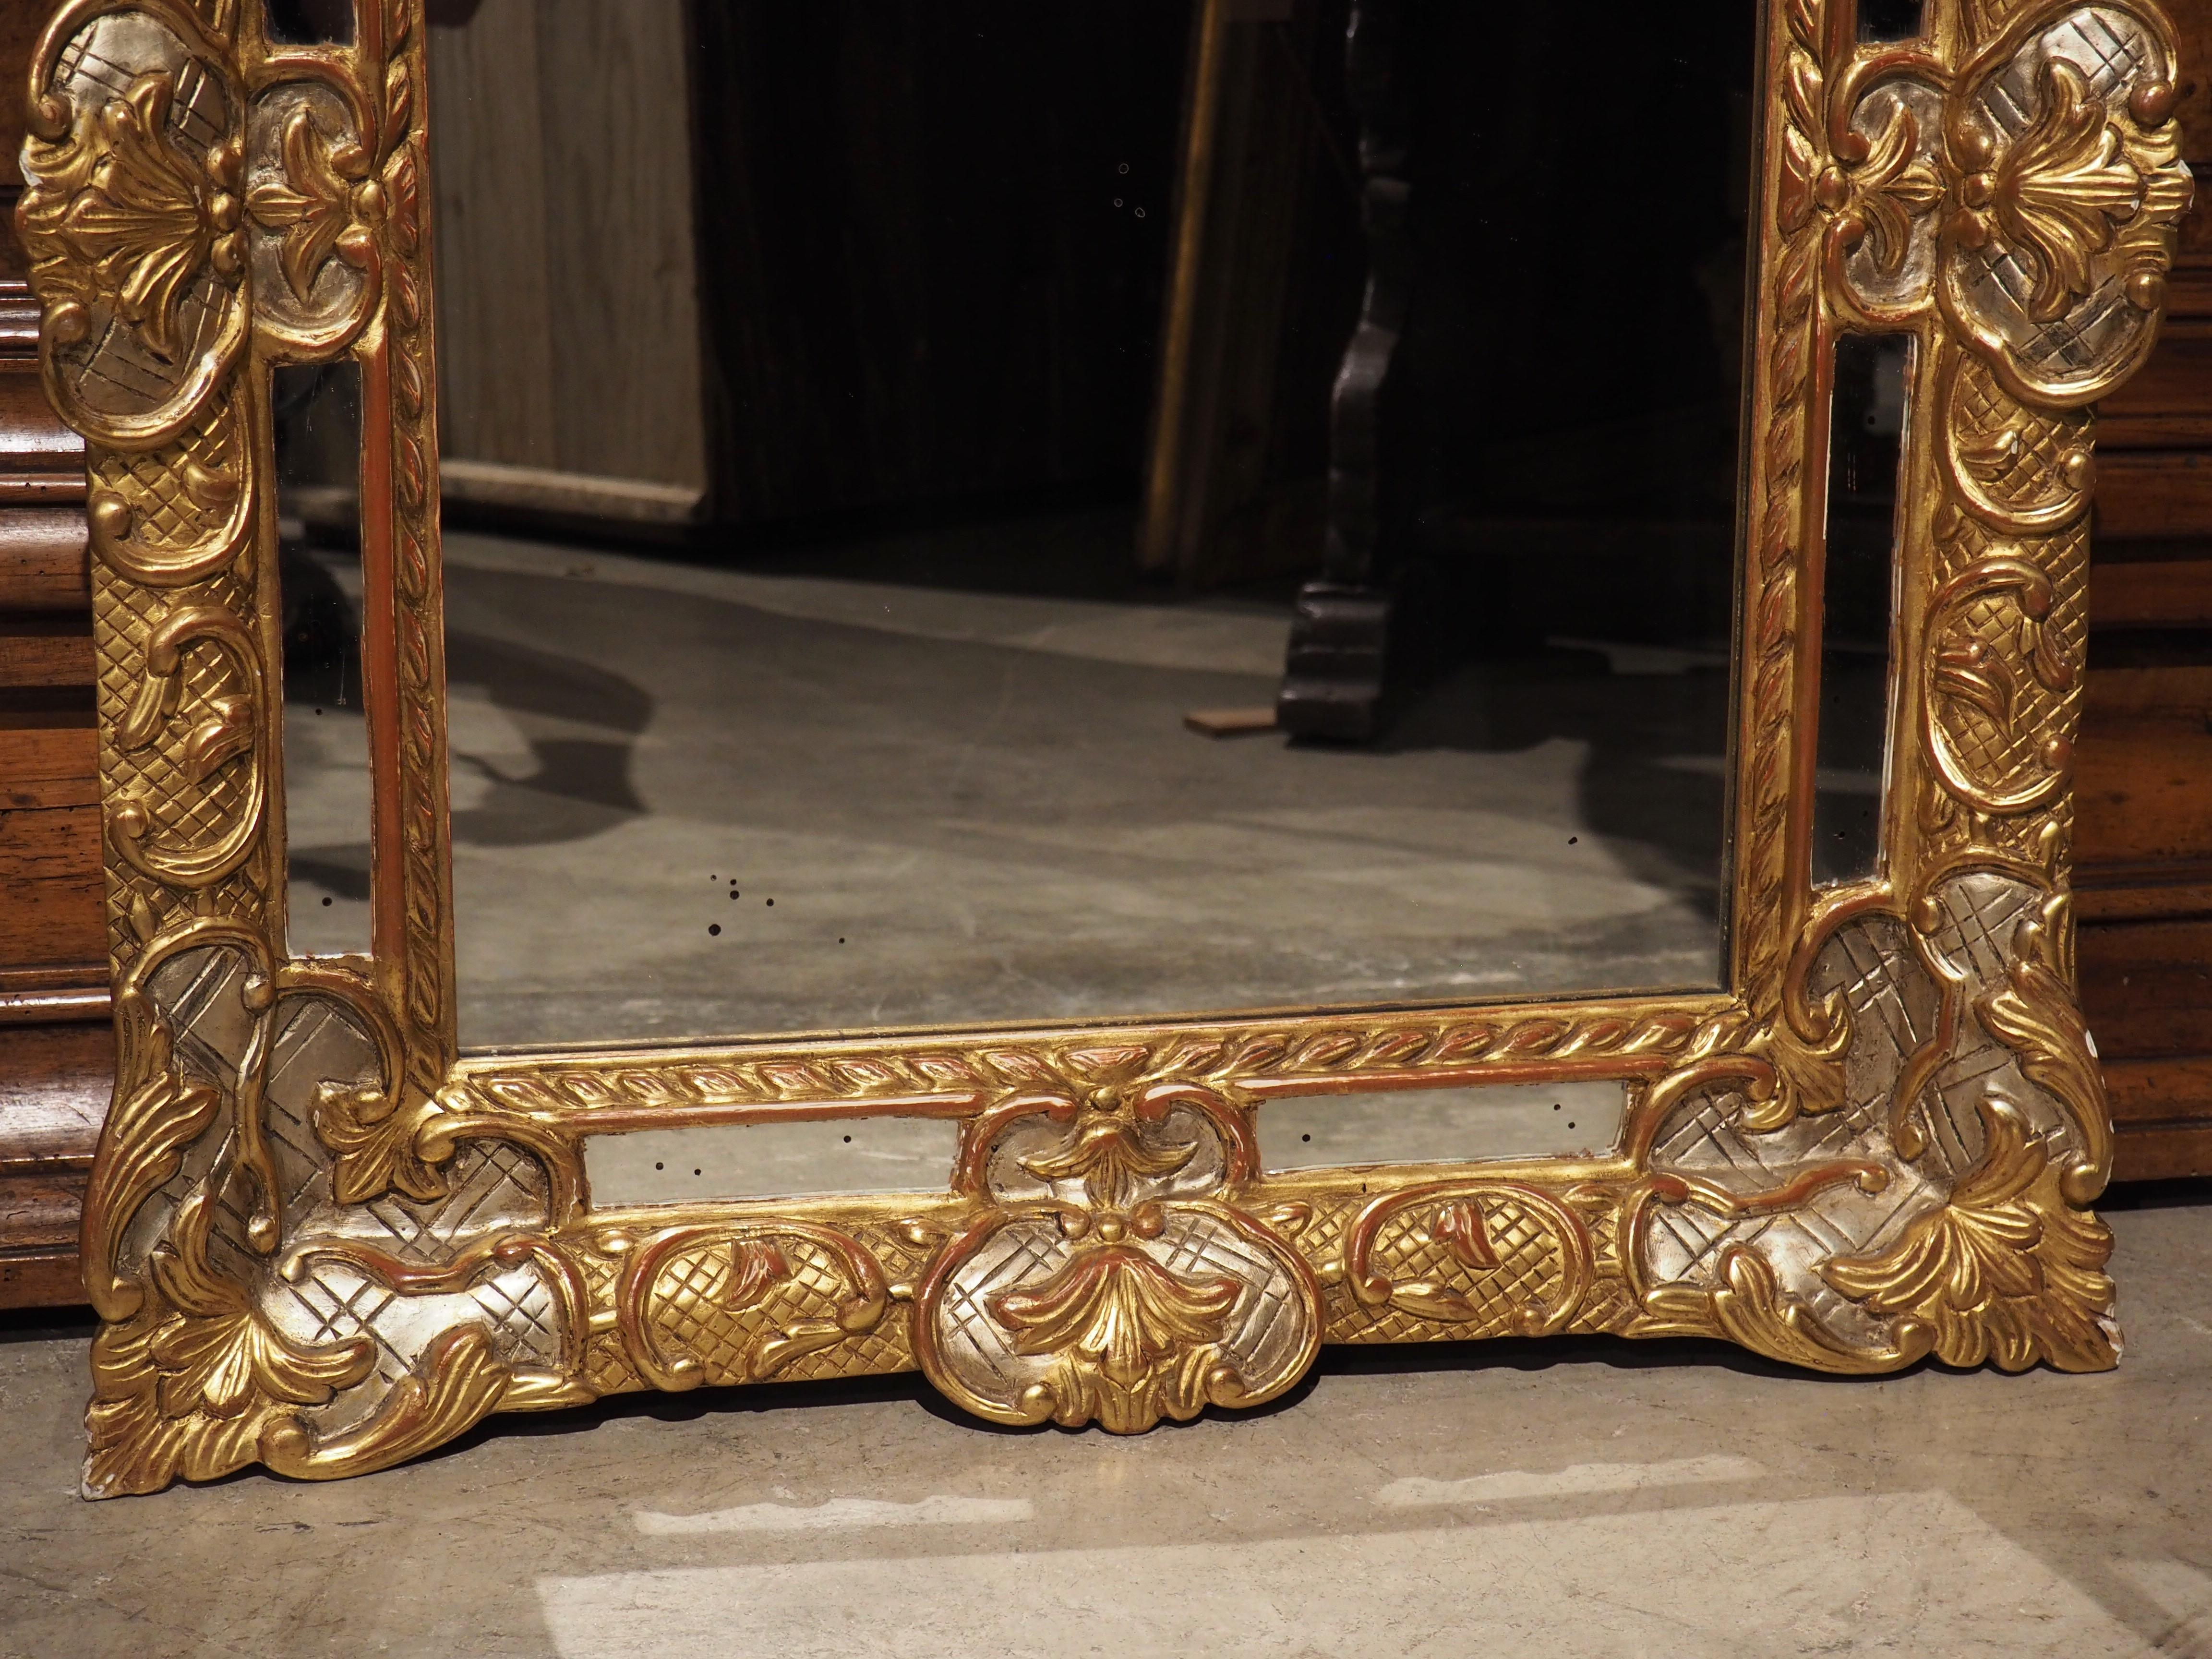 This stunning silver and gold gilt wall mirror has eight side mirrored panels separated and held in place from the main center mirror by giltwood ornamentation. The arrangement of the separate pieces of glass seen here gives this type of mirror its